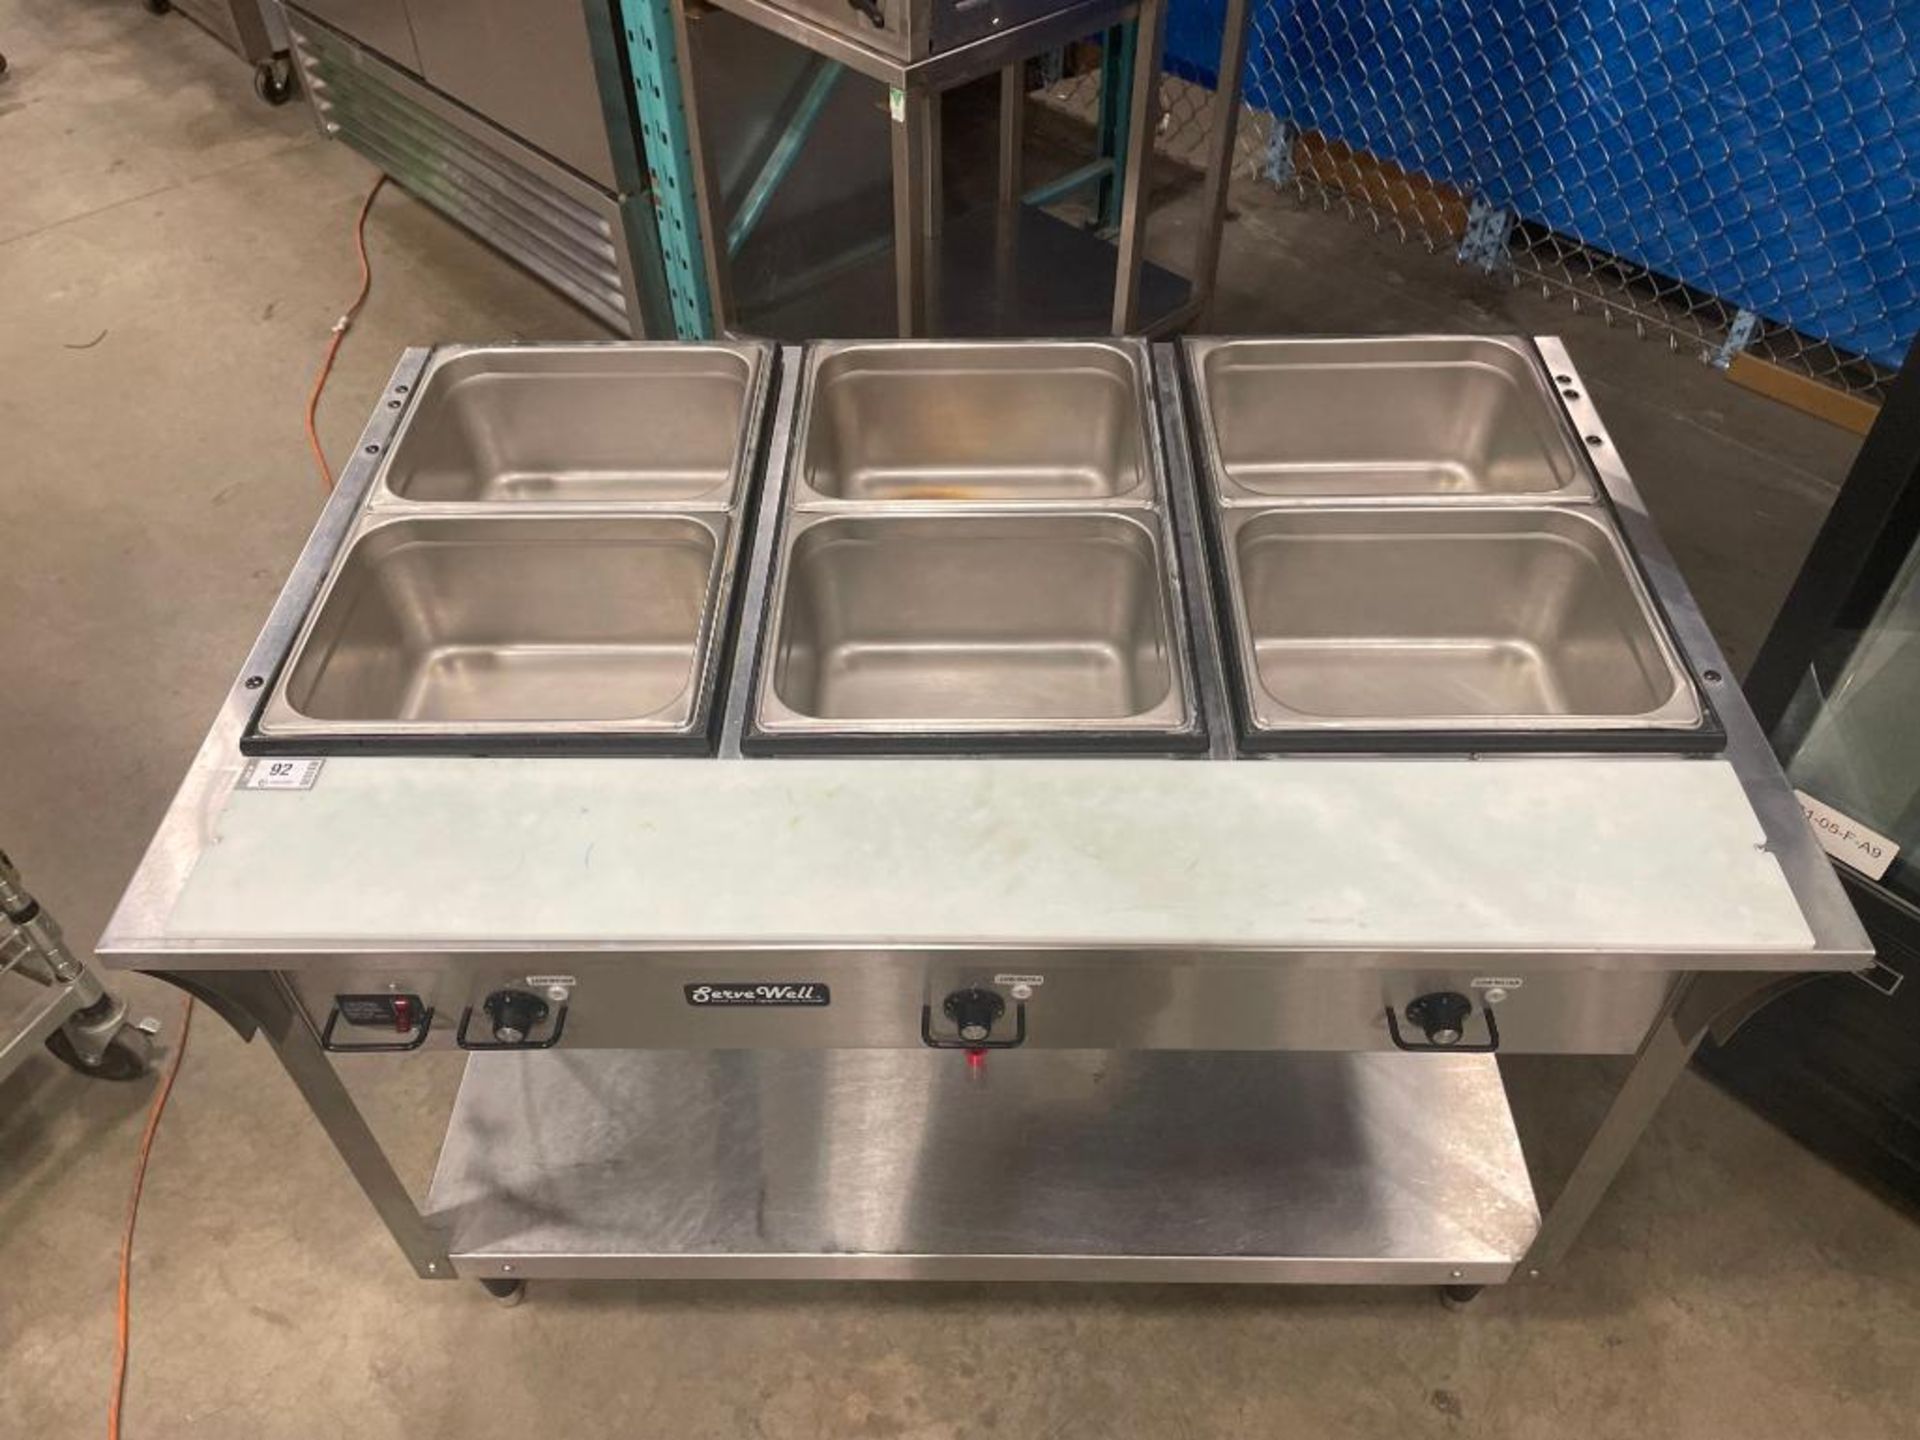 VOLLRATH SERVE WELL 3-WELL STEAM TABLE - Image 8 of 11